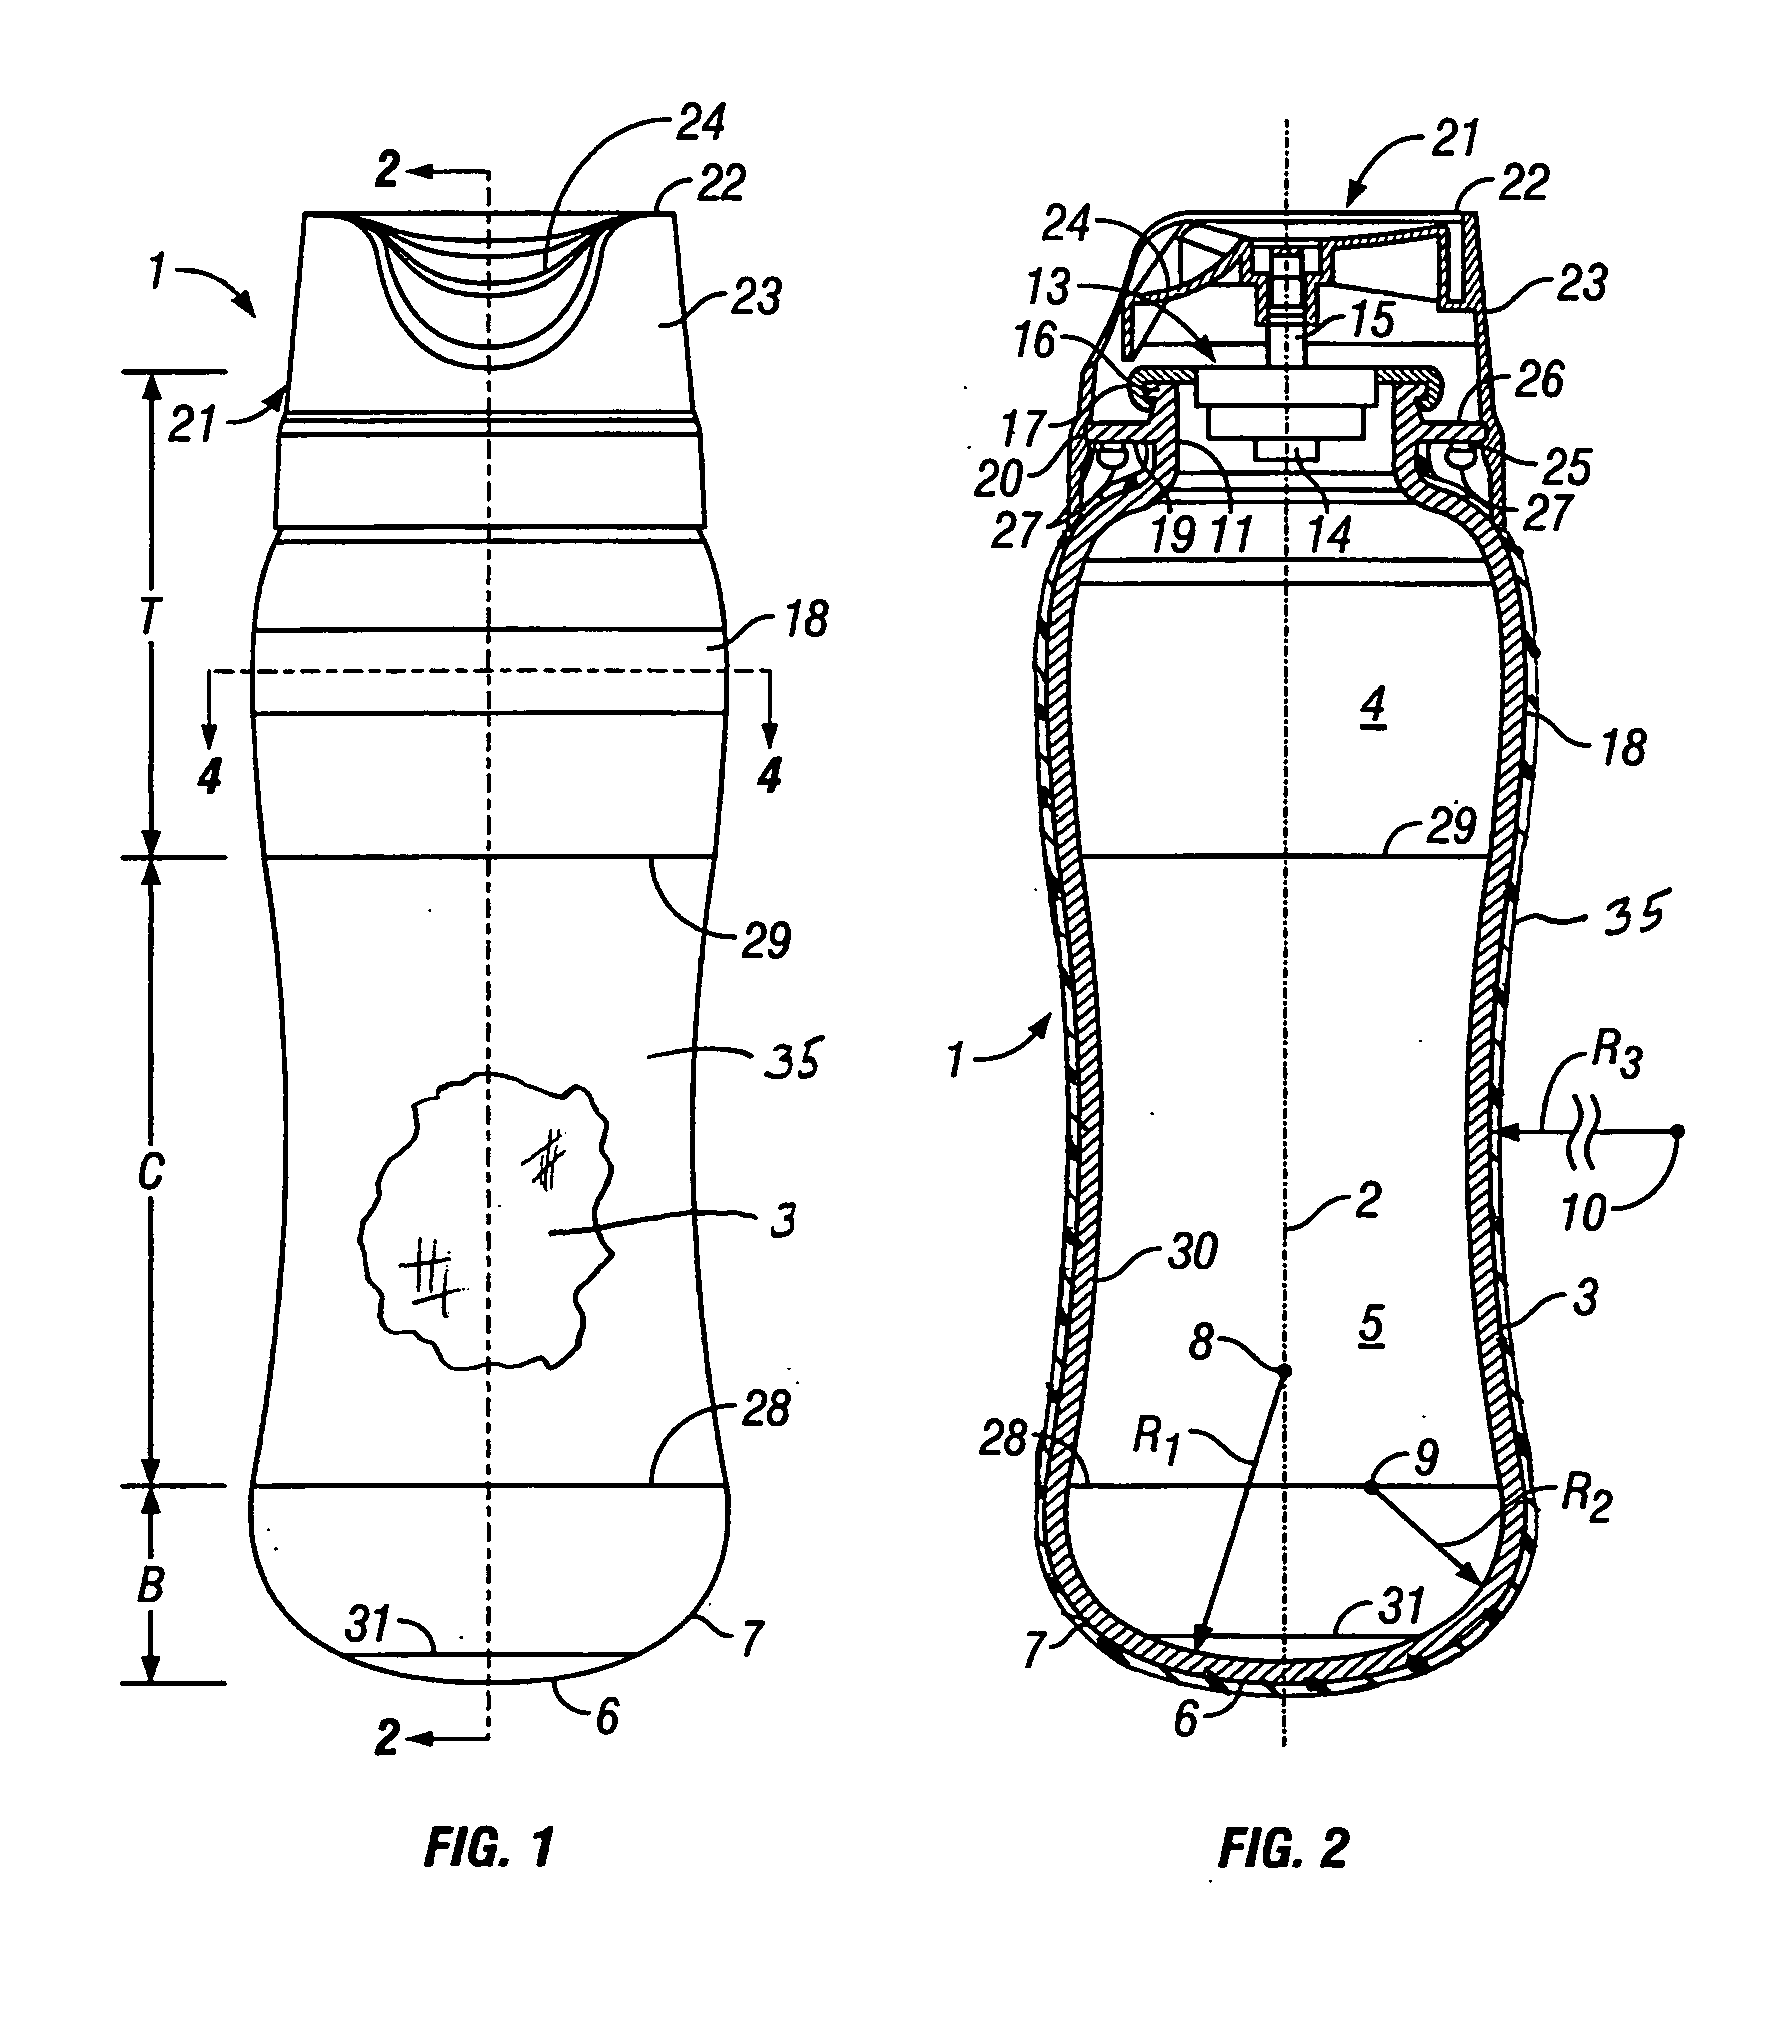 Seal-coated plastic container for dispensing a pressurized product